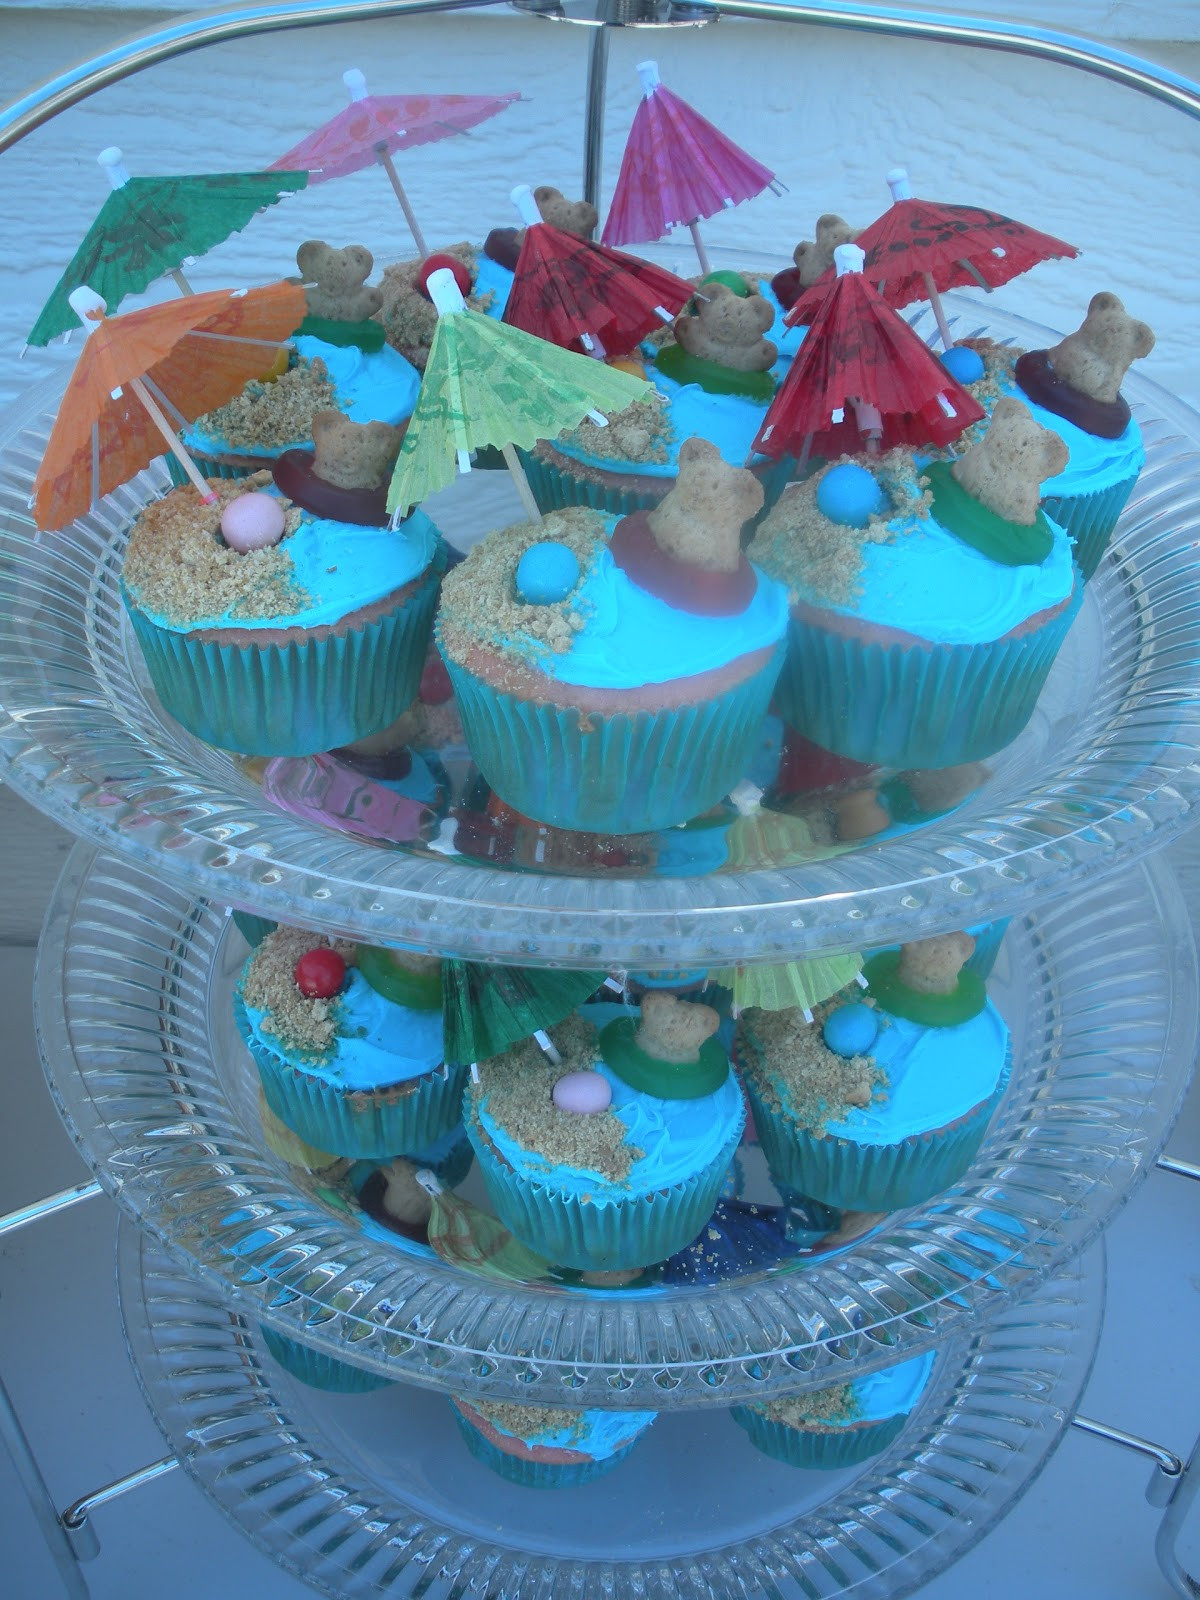 Pool Party Cupcake Ideas
 Wel e to the Mad House Pool party cupcakes